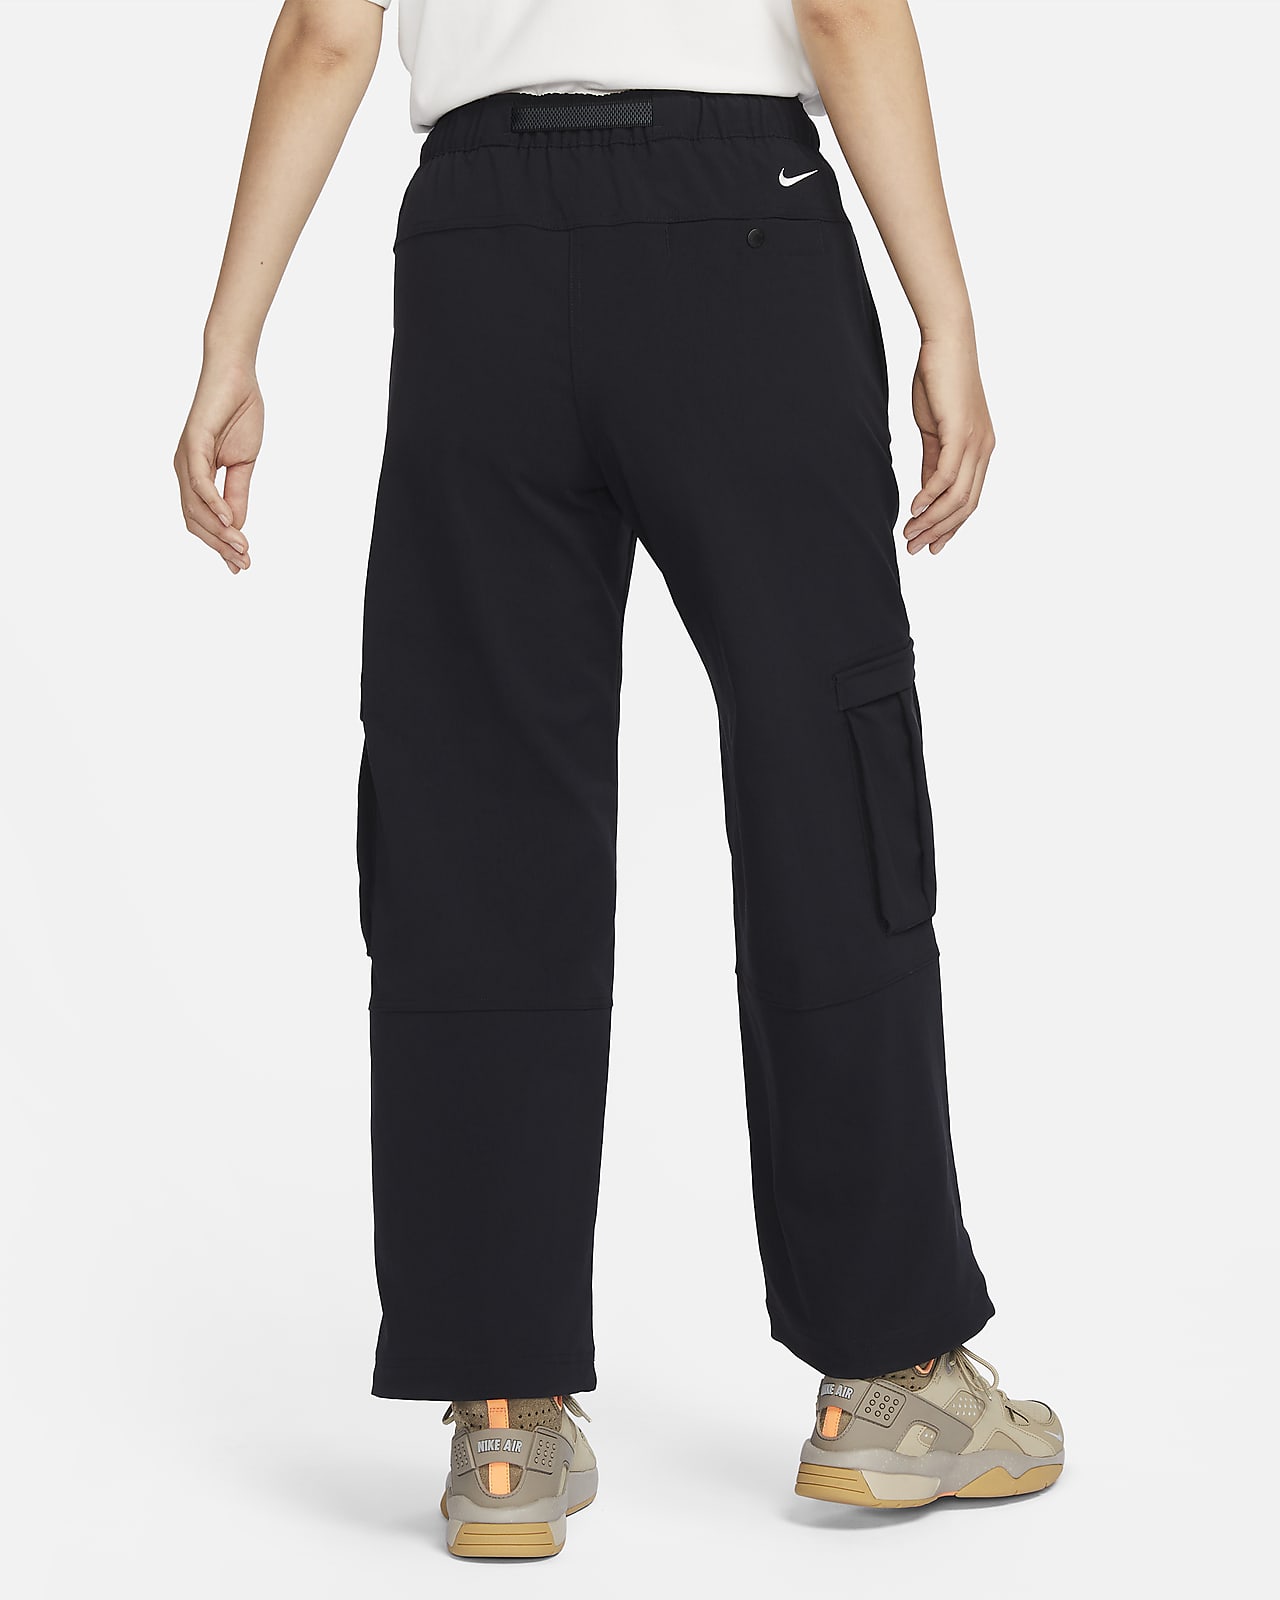 QWEEK Harajuku Red Cargo Pants For Women Oversized High Street Jogger Black  Cargo Trousers Womens With Y2K Pockets And Wide Leg In Black From Kong01,  $19.83 | DHgate.Com